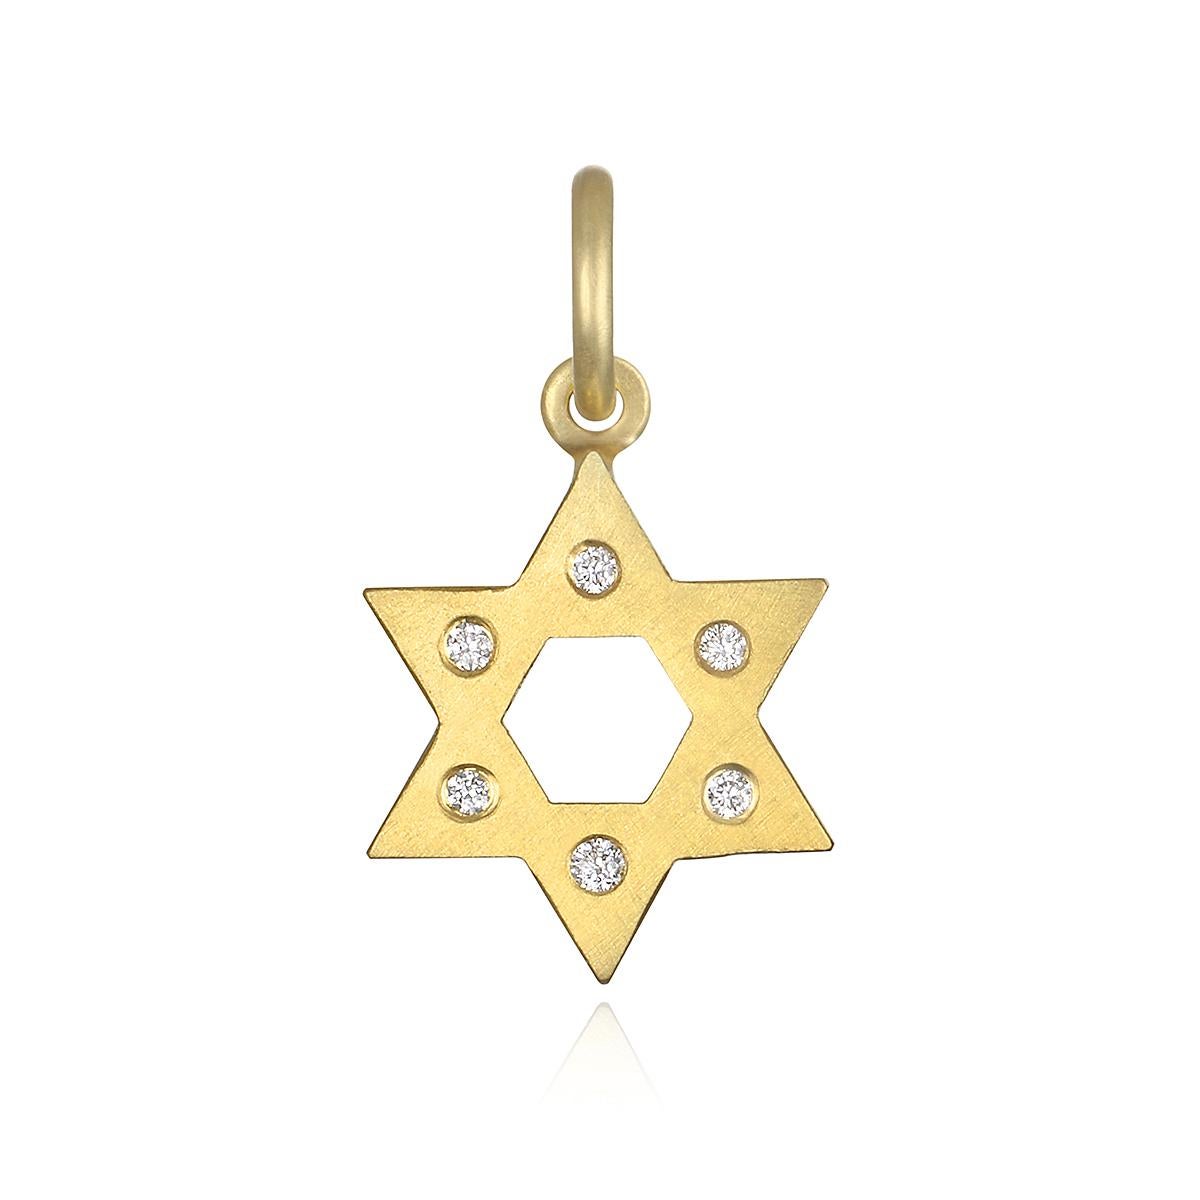 Beautifully handcrafted in 18K Green Gold this Star of David charm is studded with white diamonds. The cable chain is 16-18